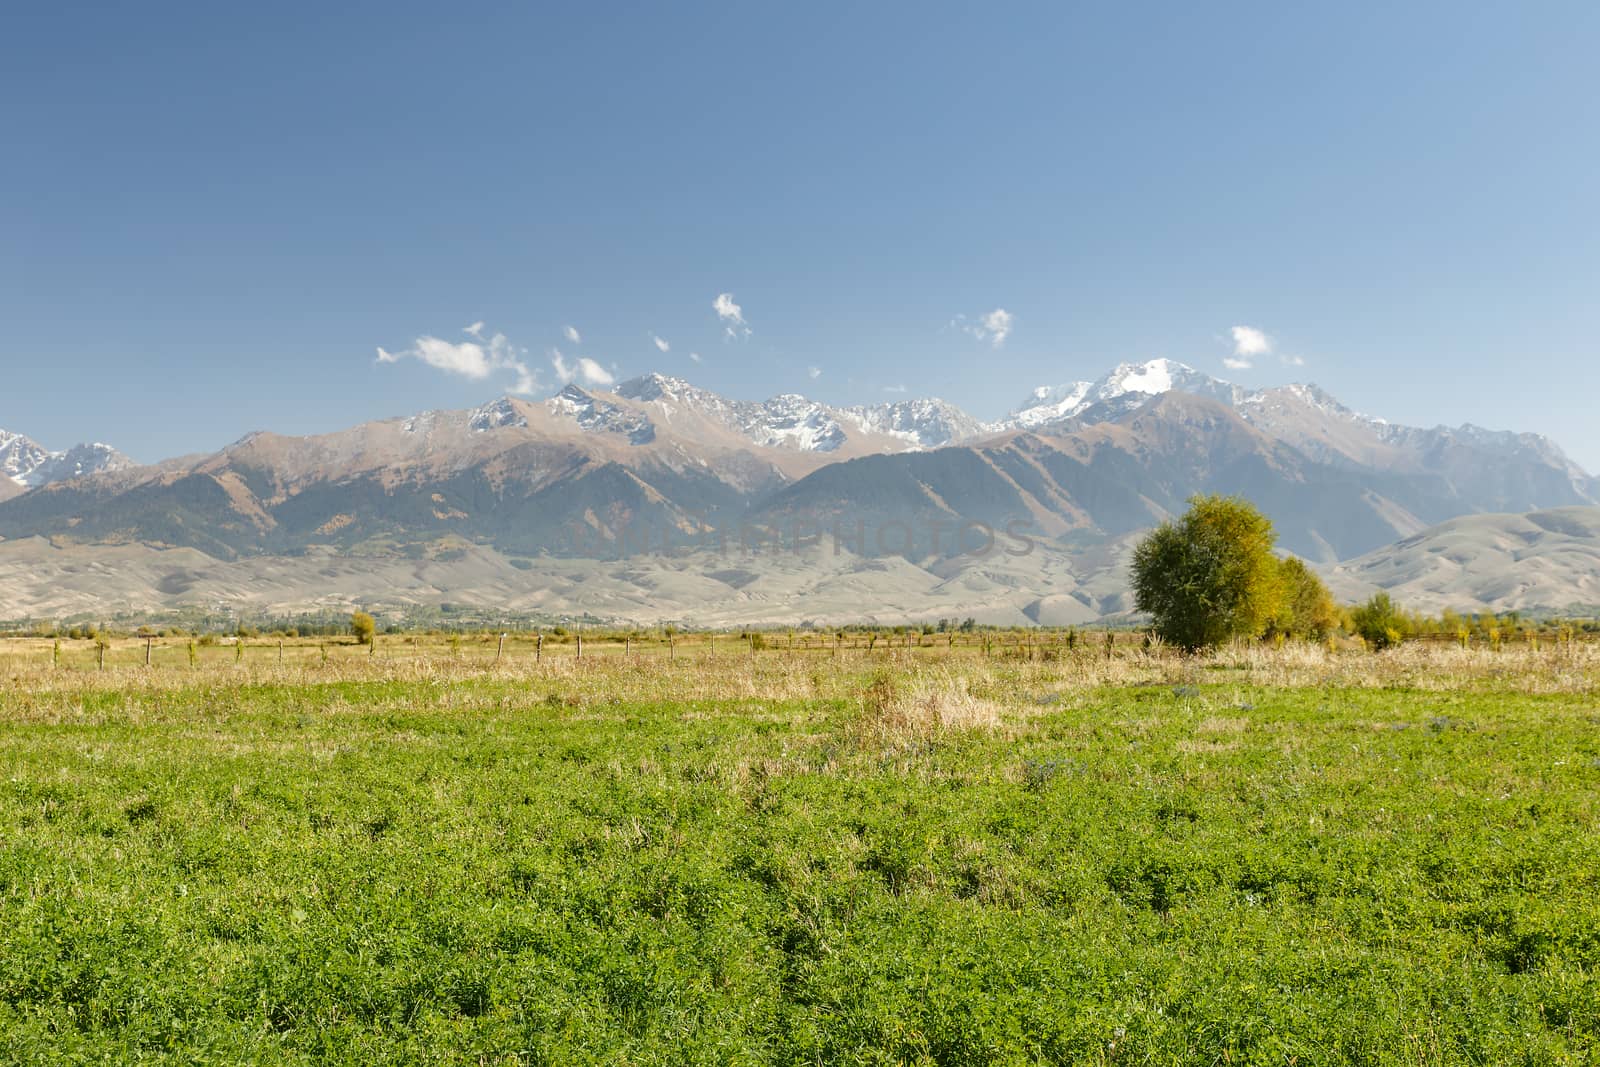 green pastures against the backdrop of snowy mountains near Lake Issyk-Kul, Kyrgyzstan